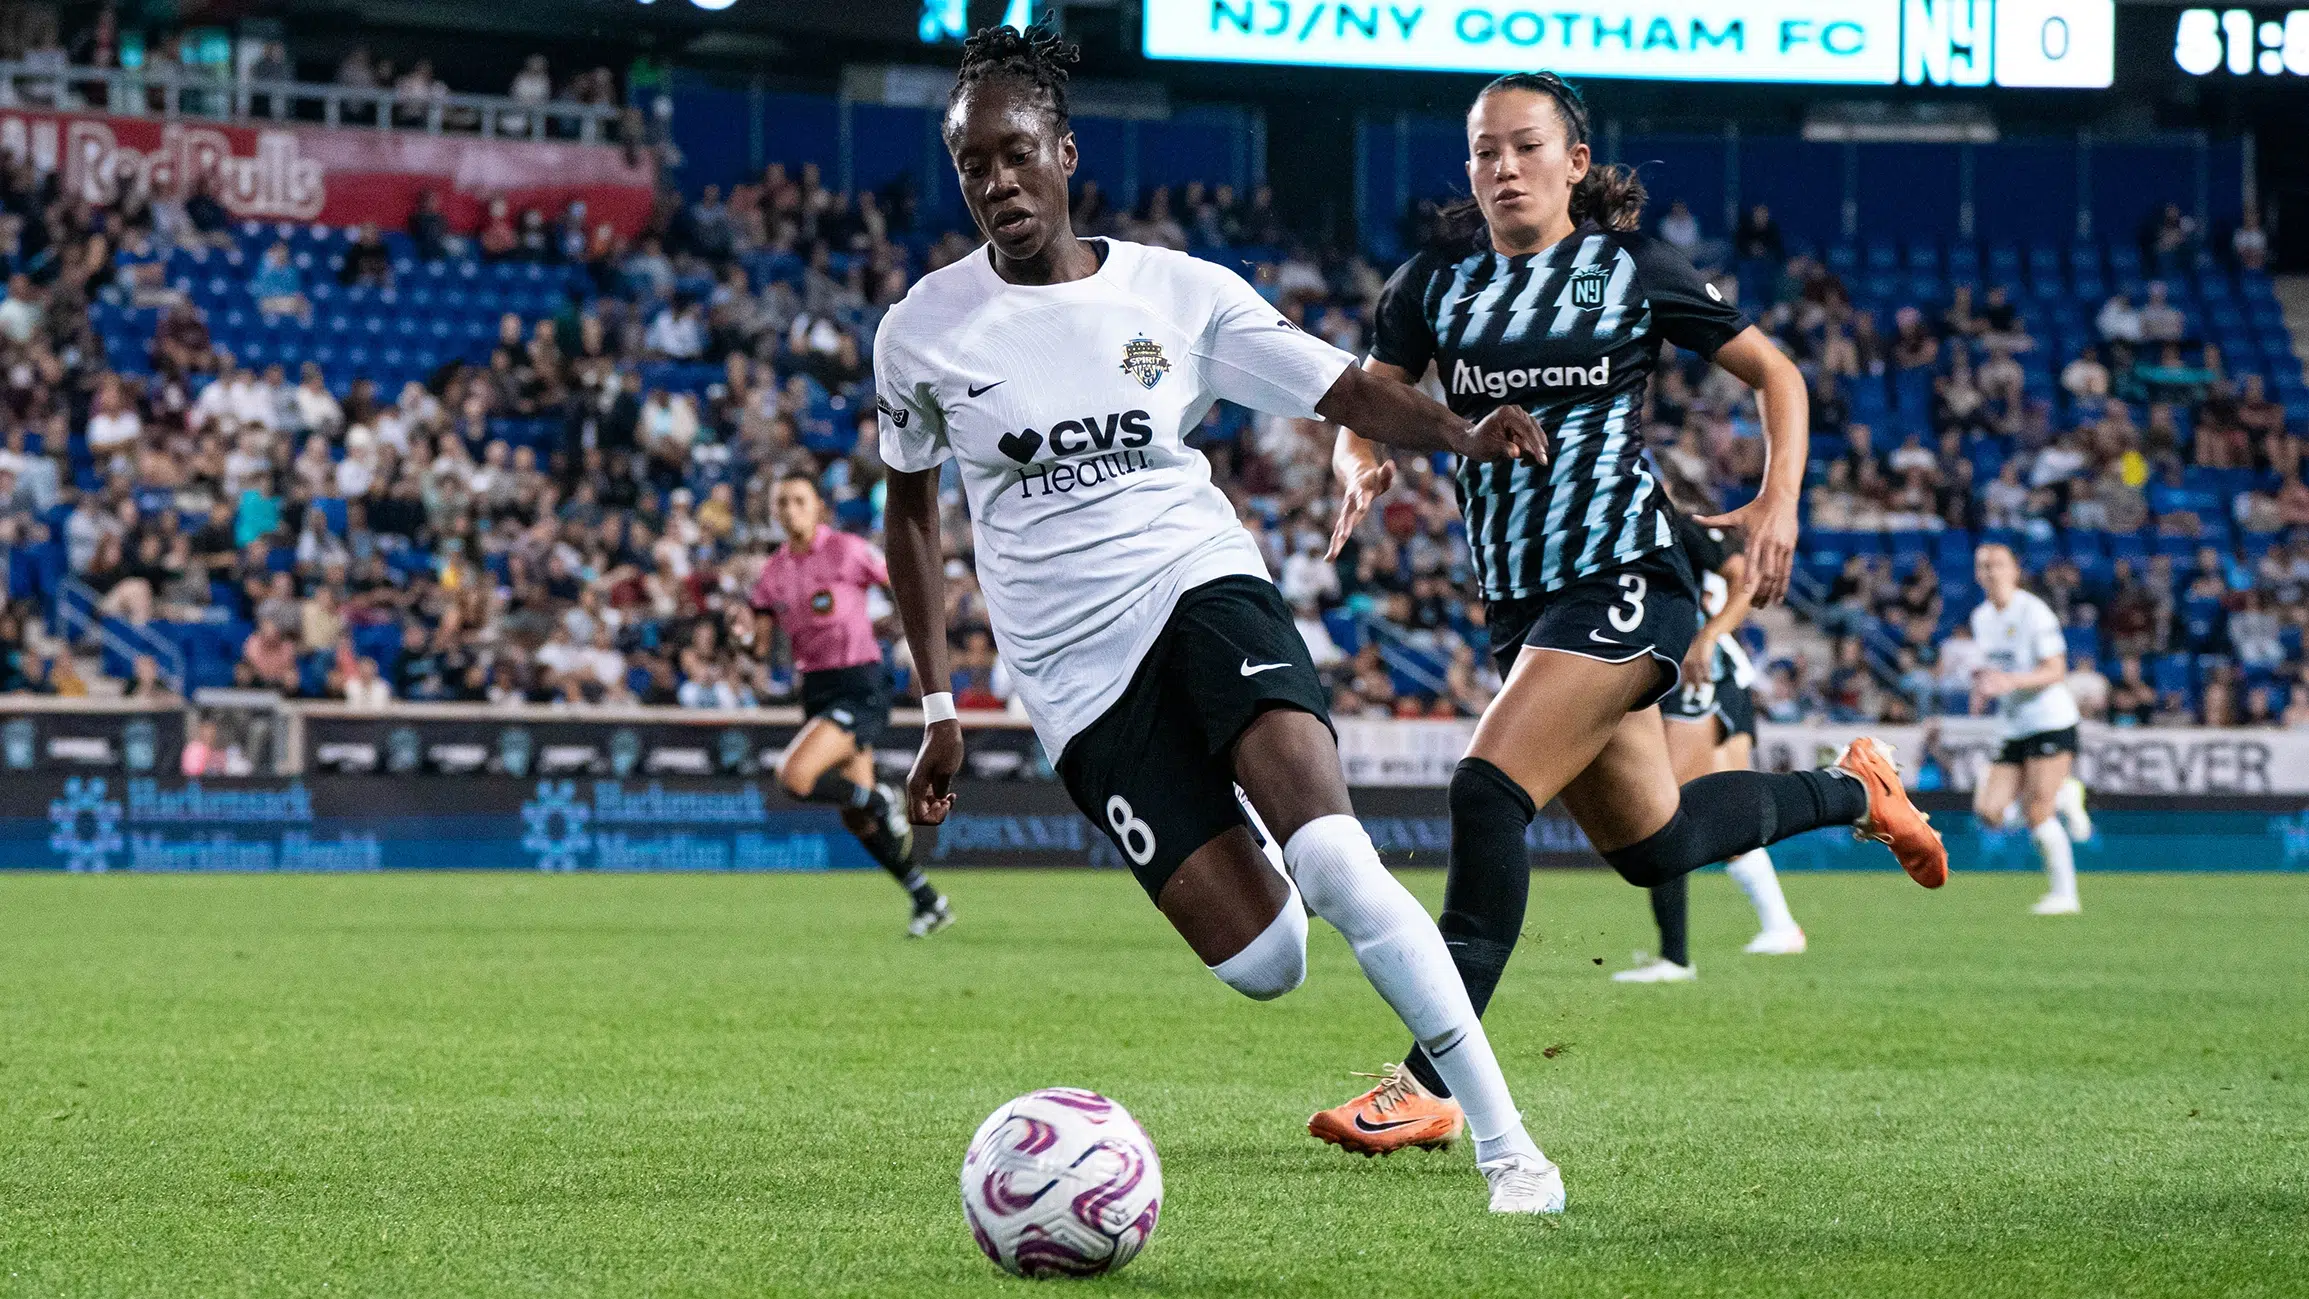 Ouleymata Sarr dribbles the ball past a NJ/NY Gotham defender. She is wearing a white jersey, black shorts, and white socks.